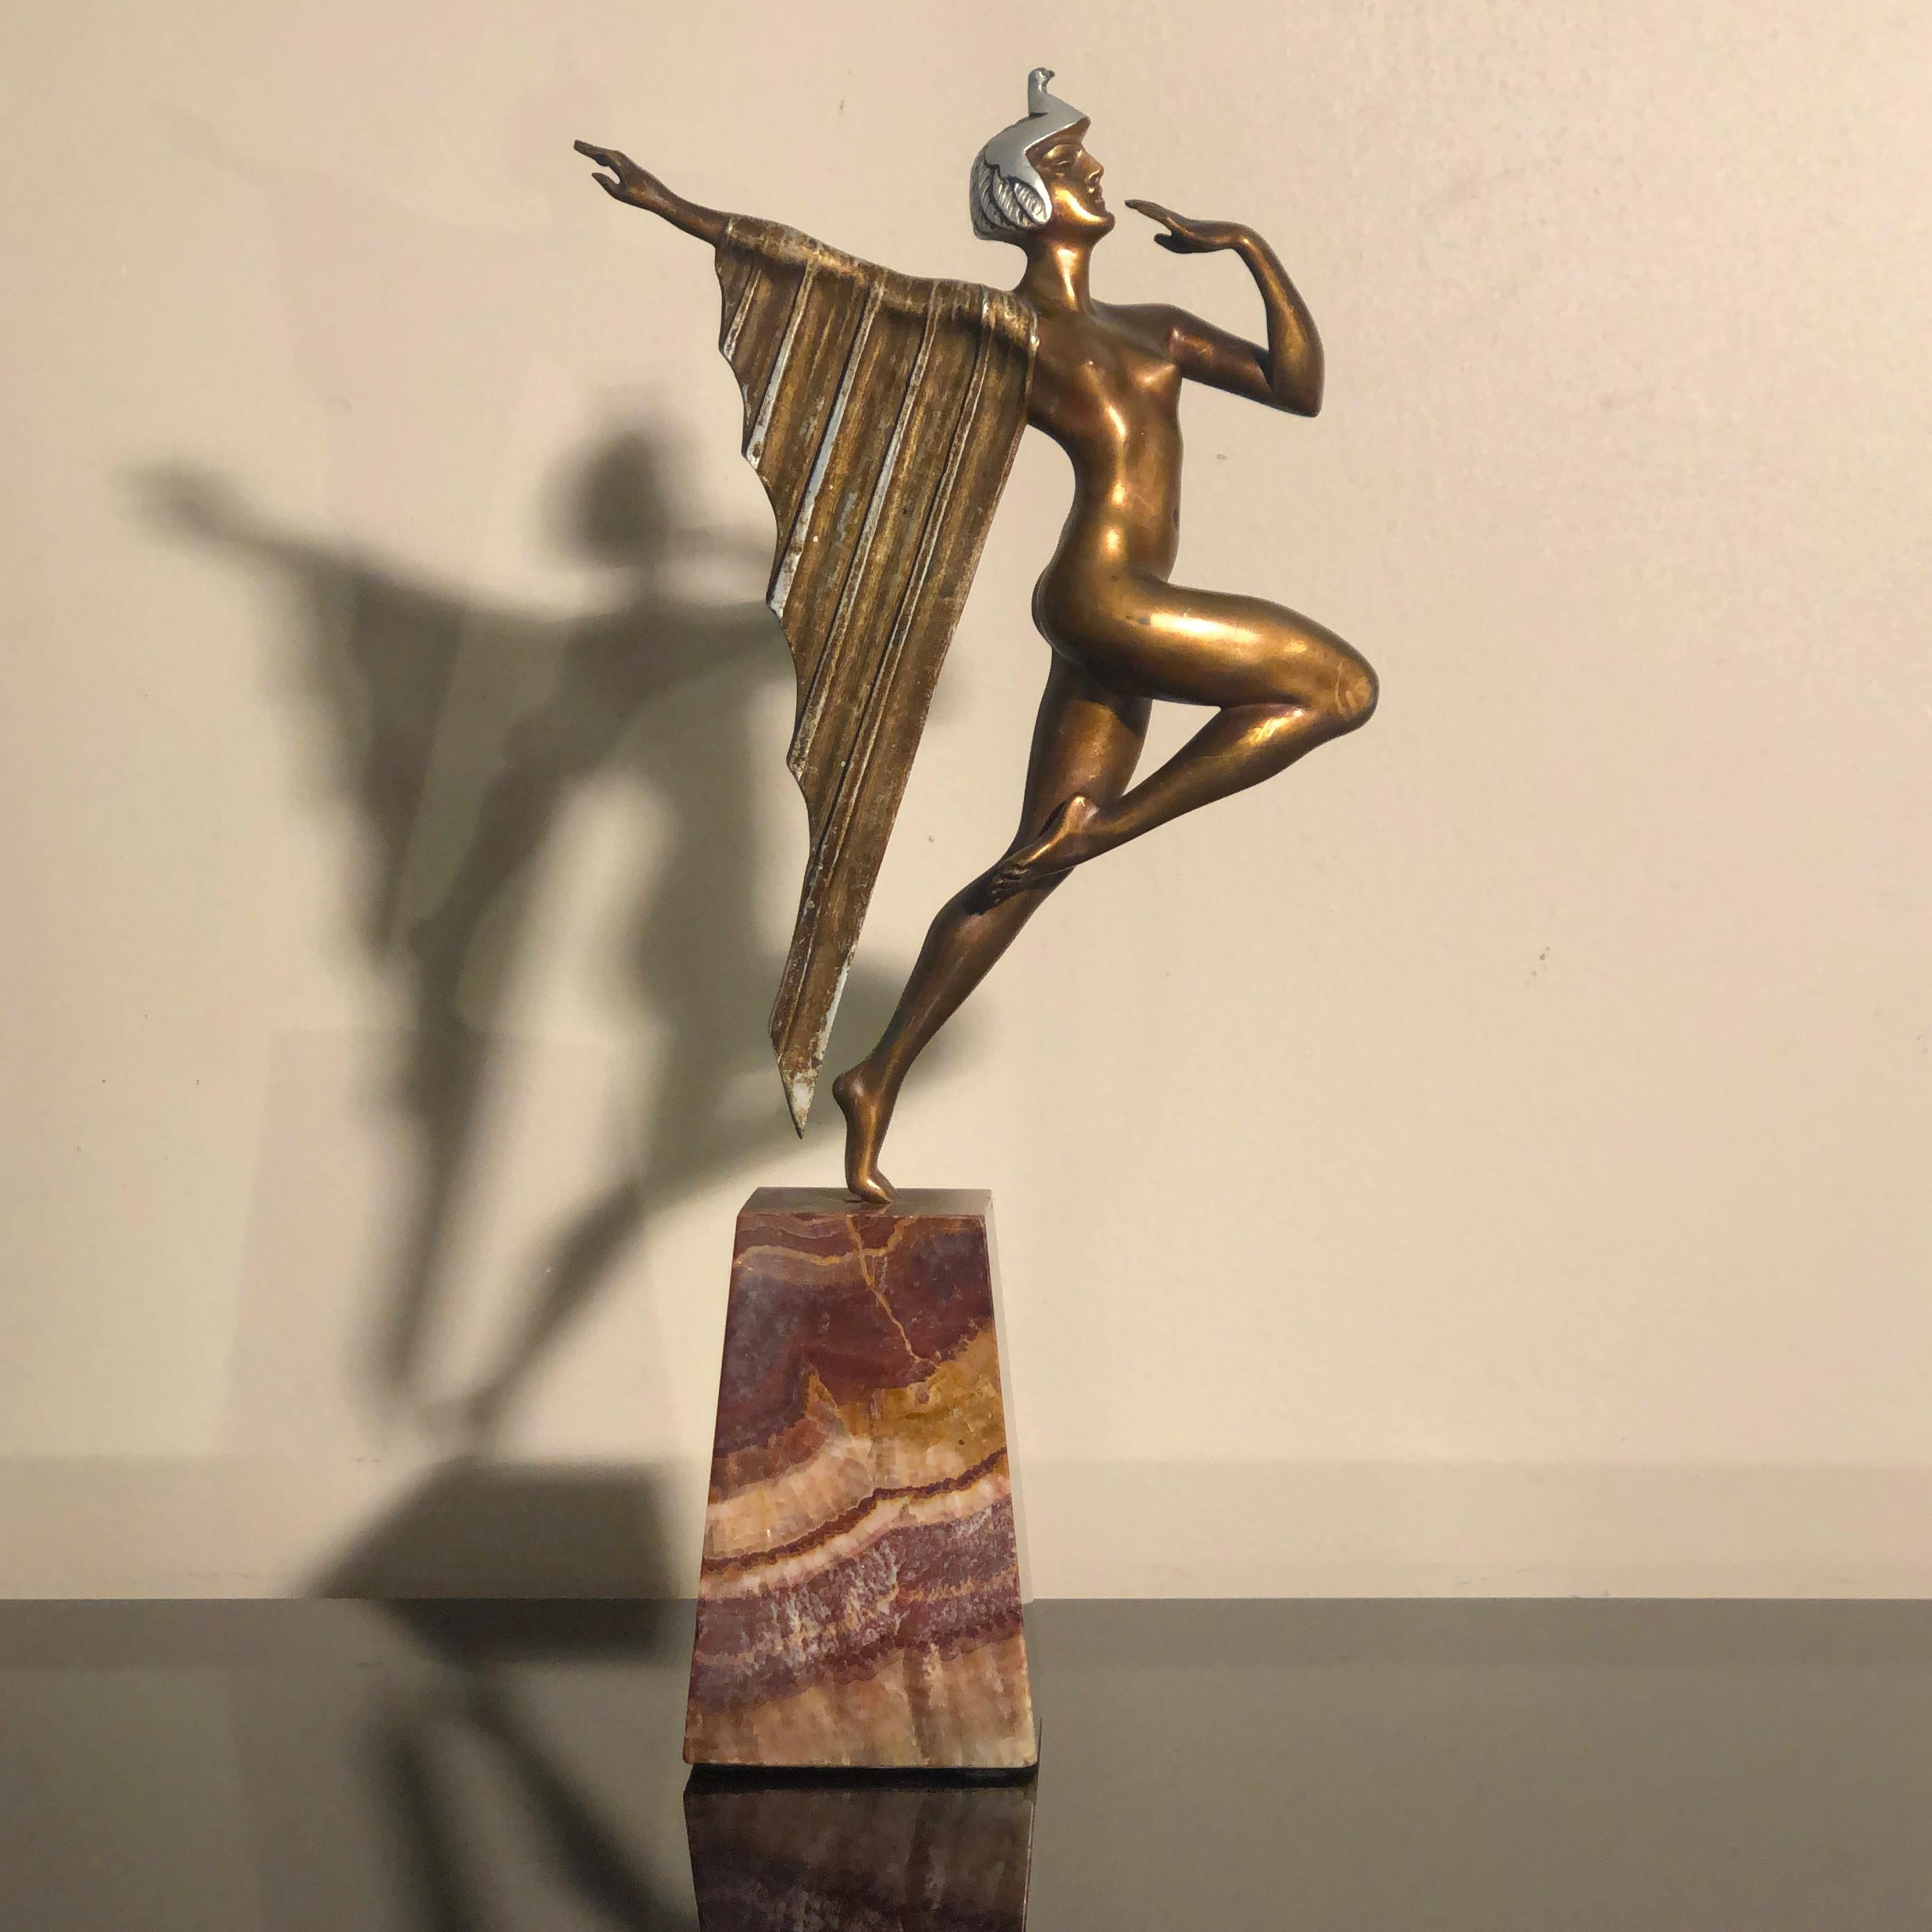 Art Deco bronze marble base Egyptian dancer sculpture, France 1930s

Art Deco sculpture representing an Egyptian Dancer, attributed to French sculptor, Limousin. Casted in cold painted bronze and mounted on red marble stand. The dancer seems to